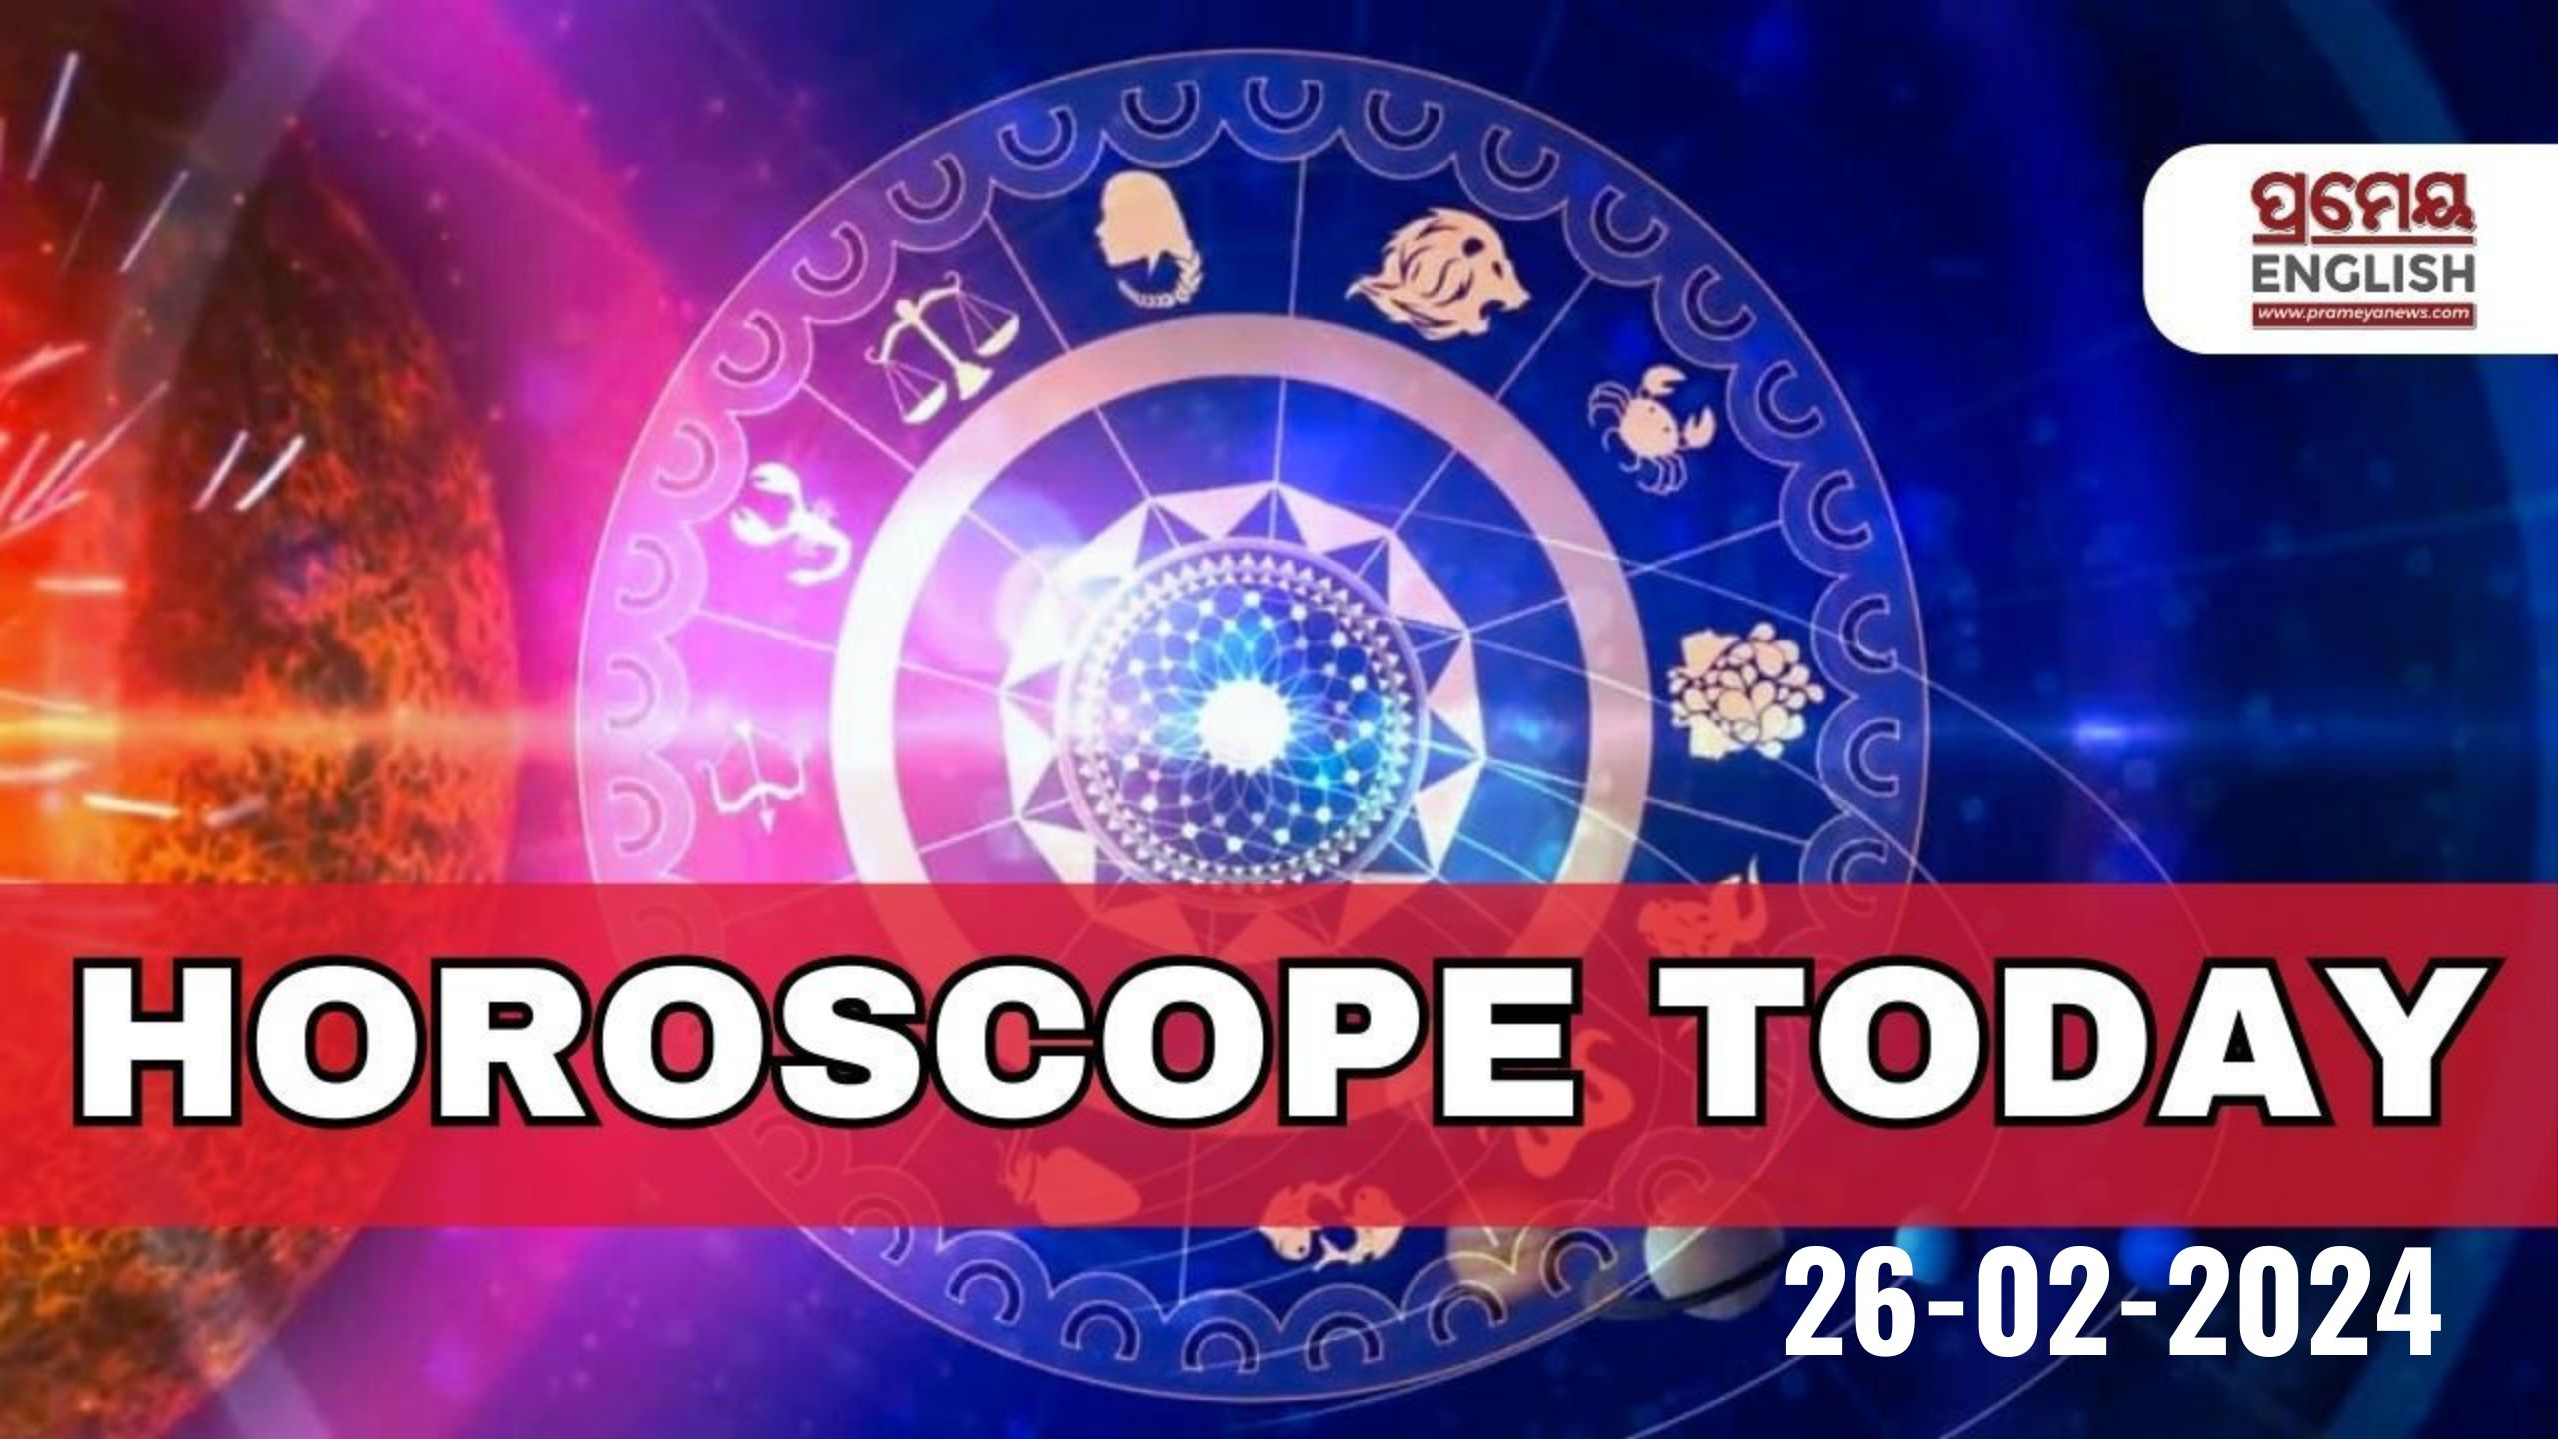 Horoscope Today, Feb 12, 2024: Check astrological prediction for Gemini, Leo and other signsHoroscope Today, Feb 12, 2024: Check astrological prediction for Gemini, Leo and other signs